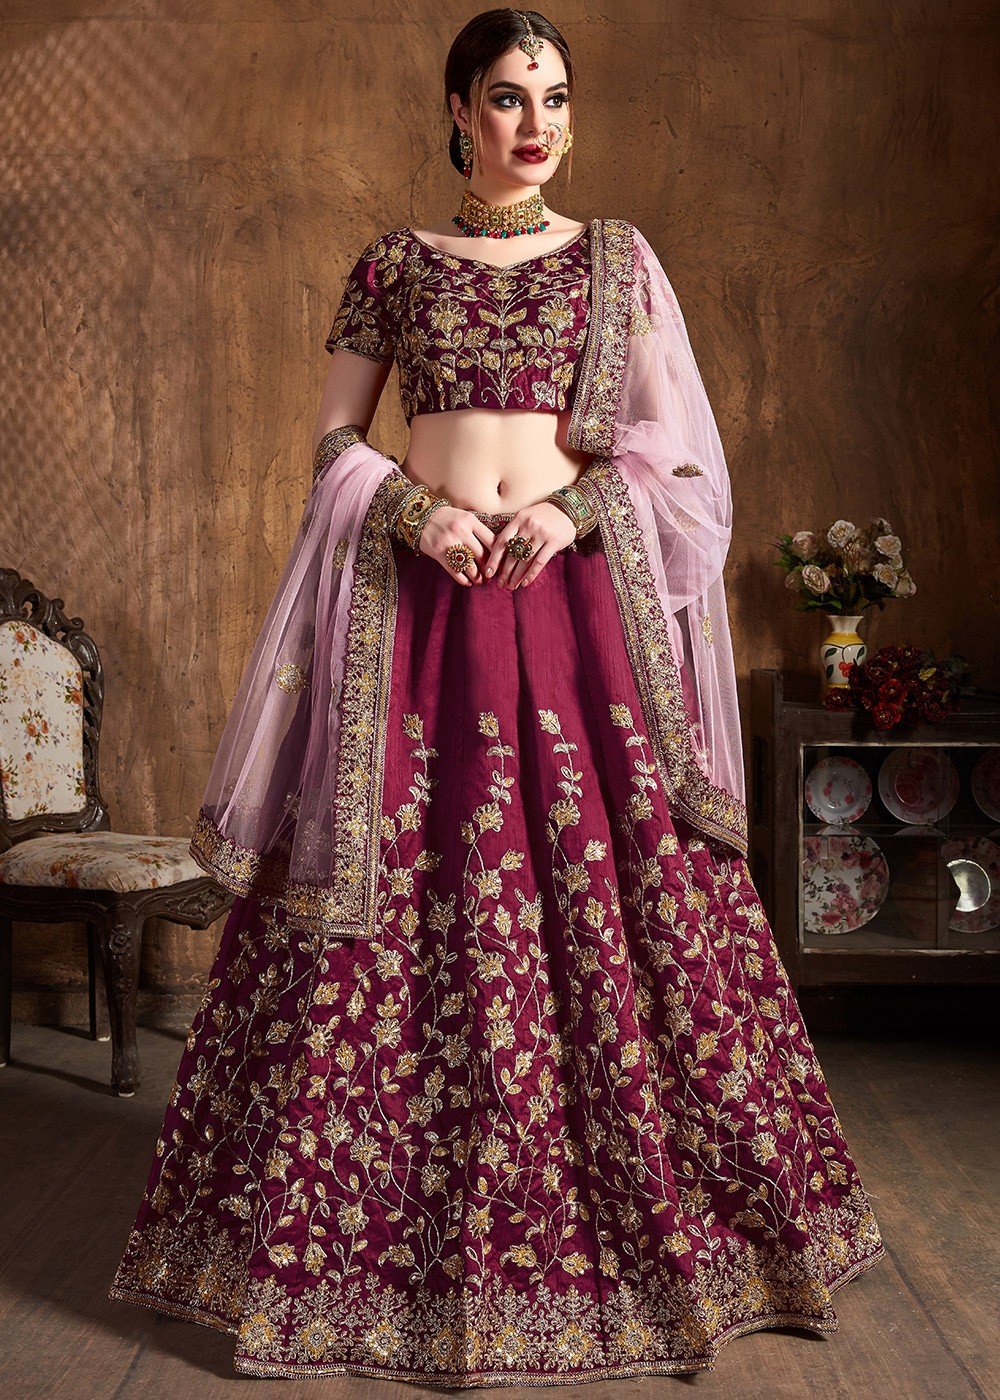 30+ Pink Bridal Lehengas That Will Steal Your Heart - Eternity